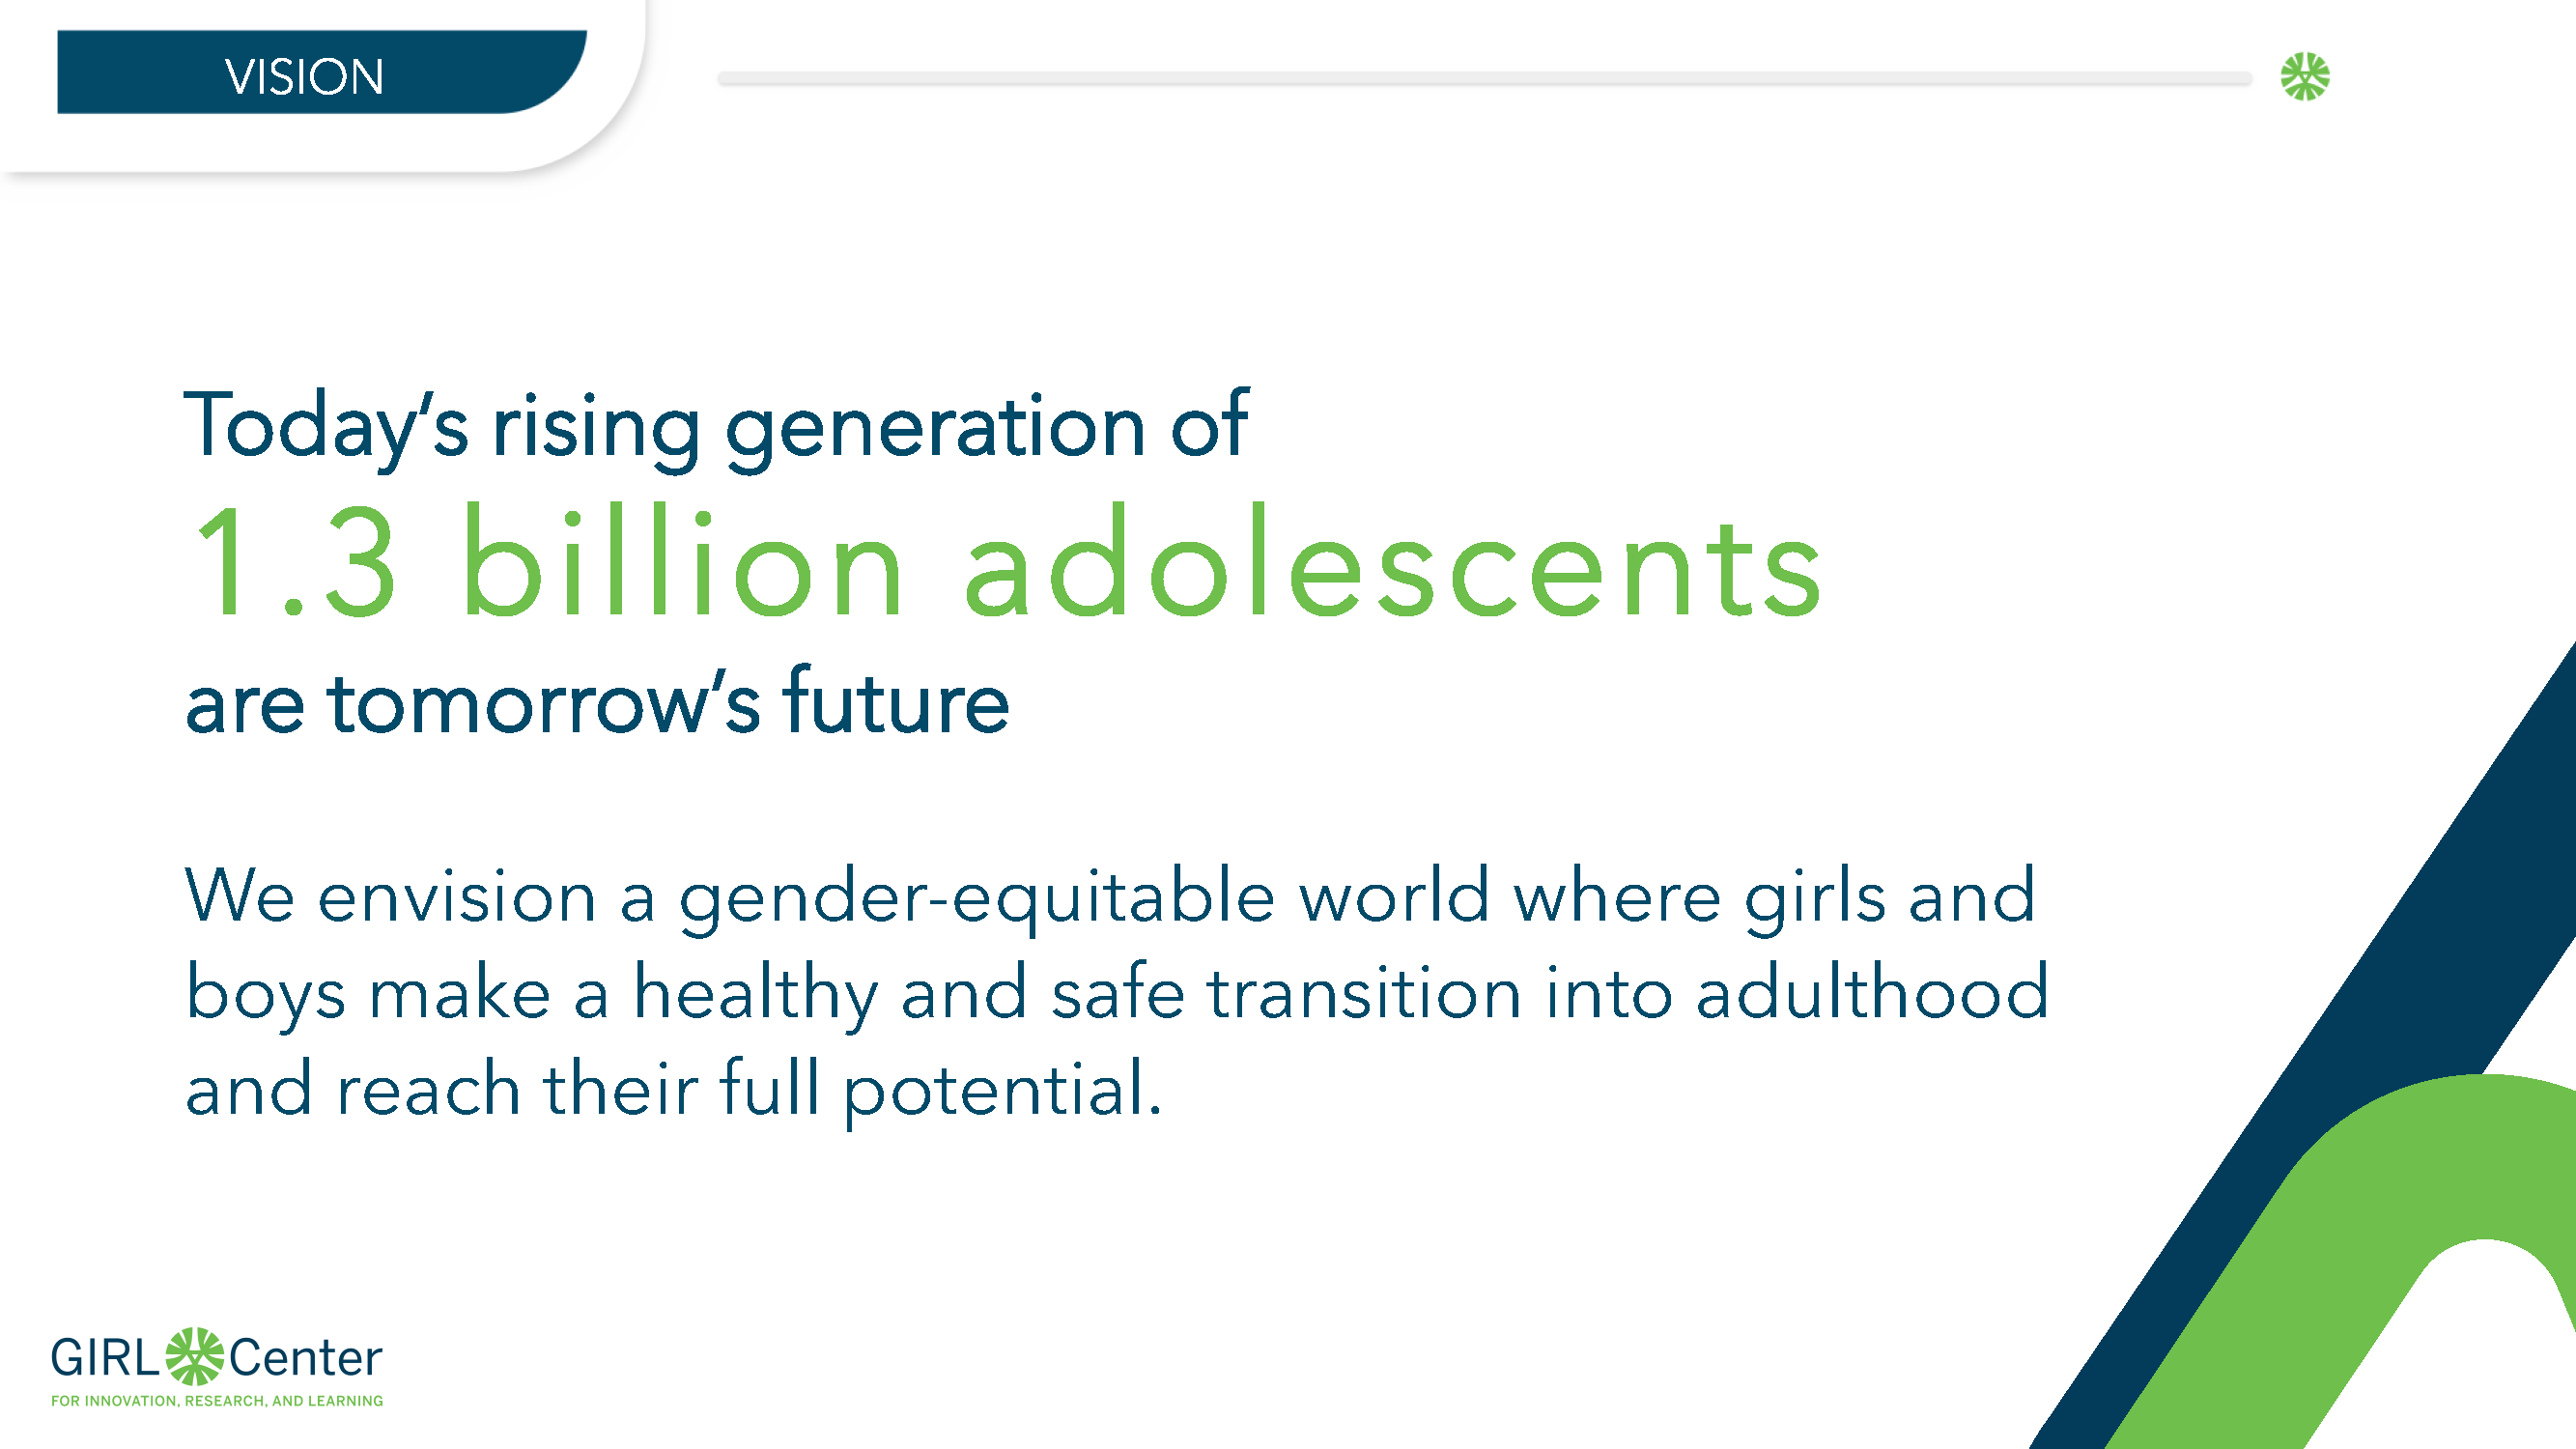 Today's rising generation of 1.3 billion adolescents are tomorrow's future. We envision a gender-equitable world where girls and boys make a healthy and safe transition into adulthood and reach their full potential. Ideas. Evidence. Impact.